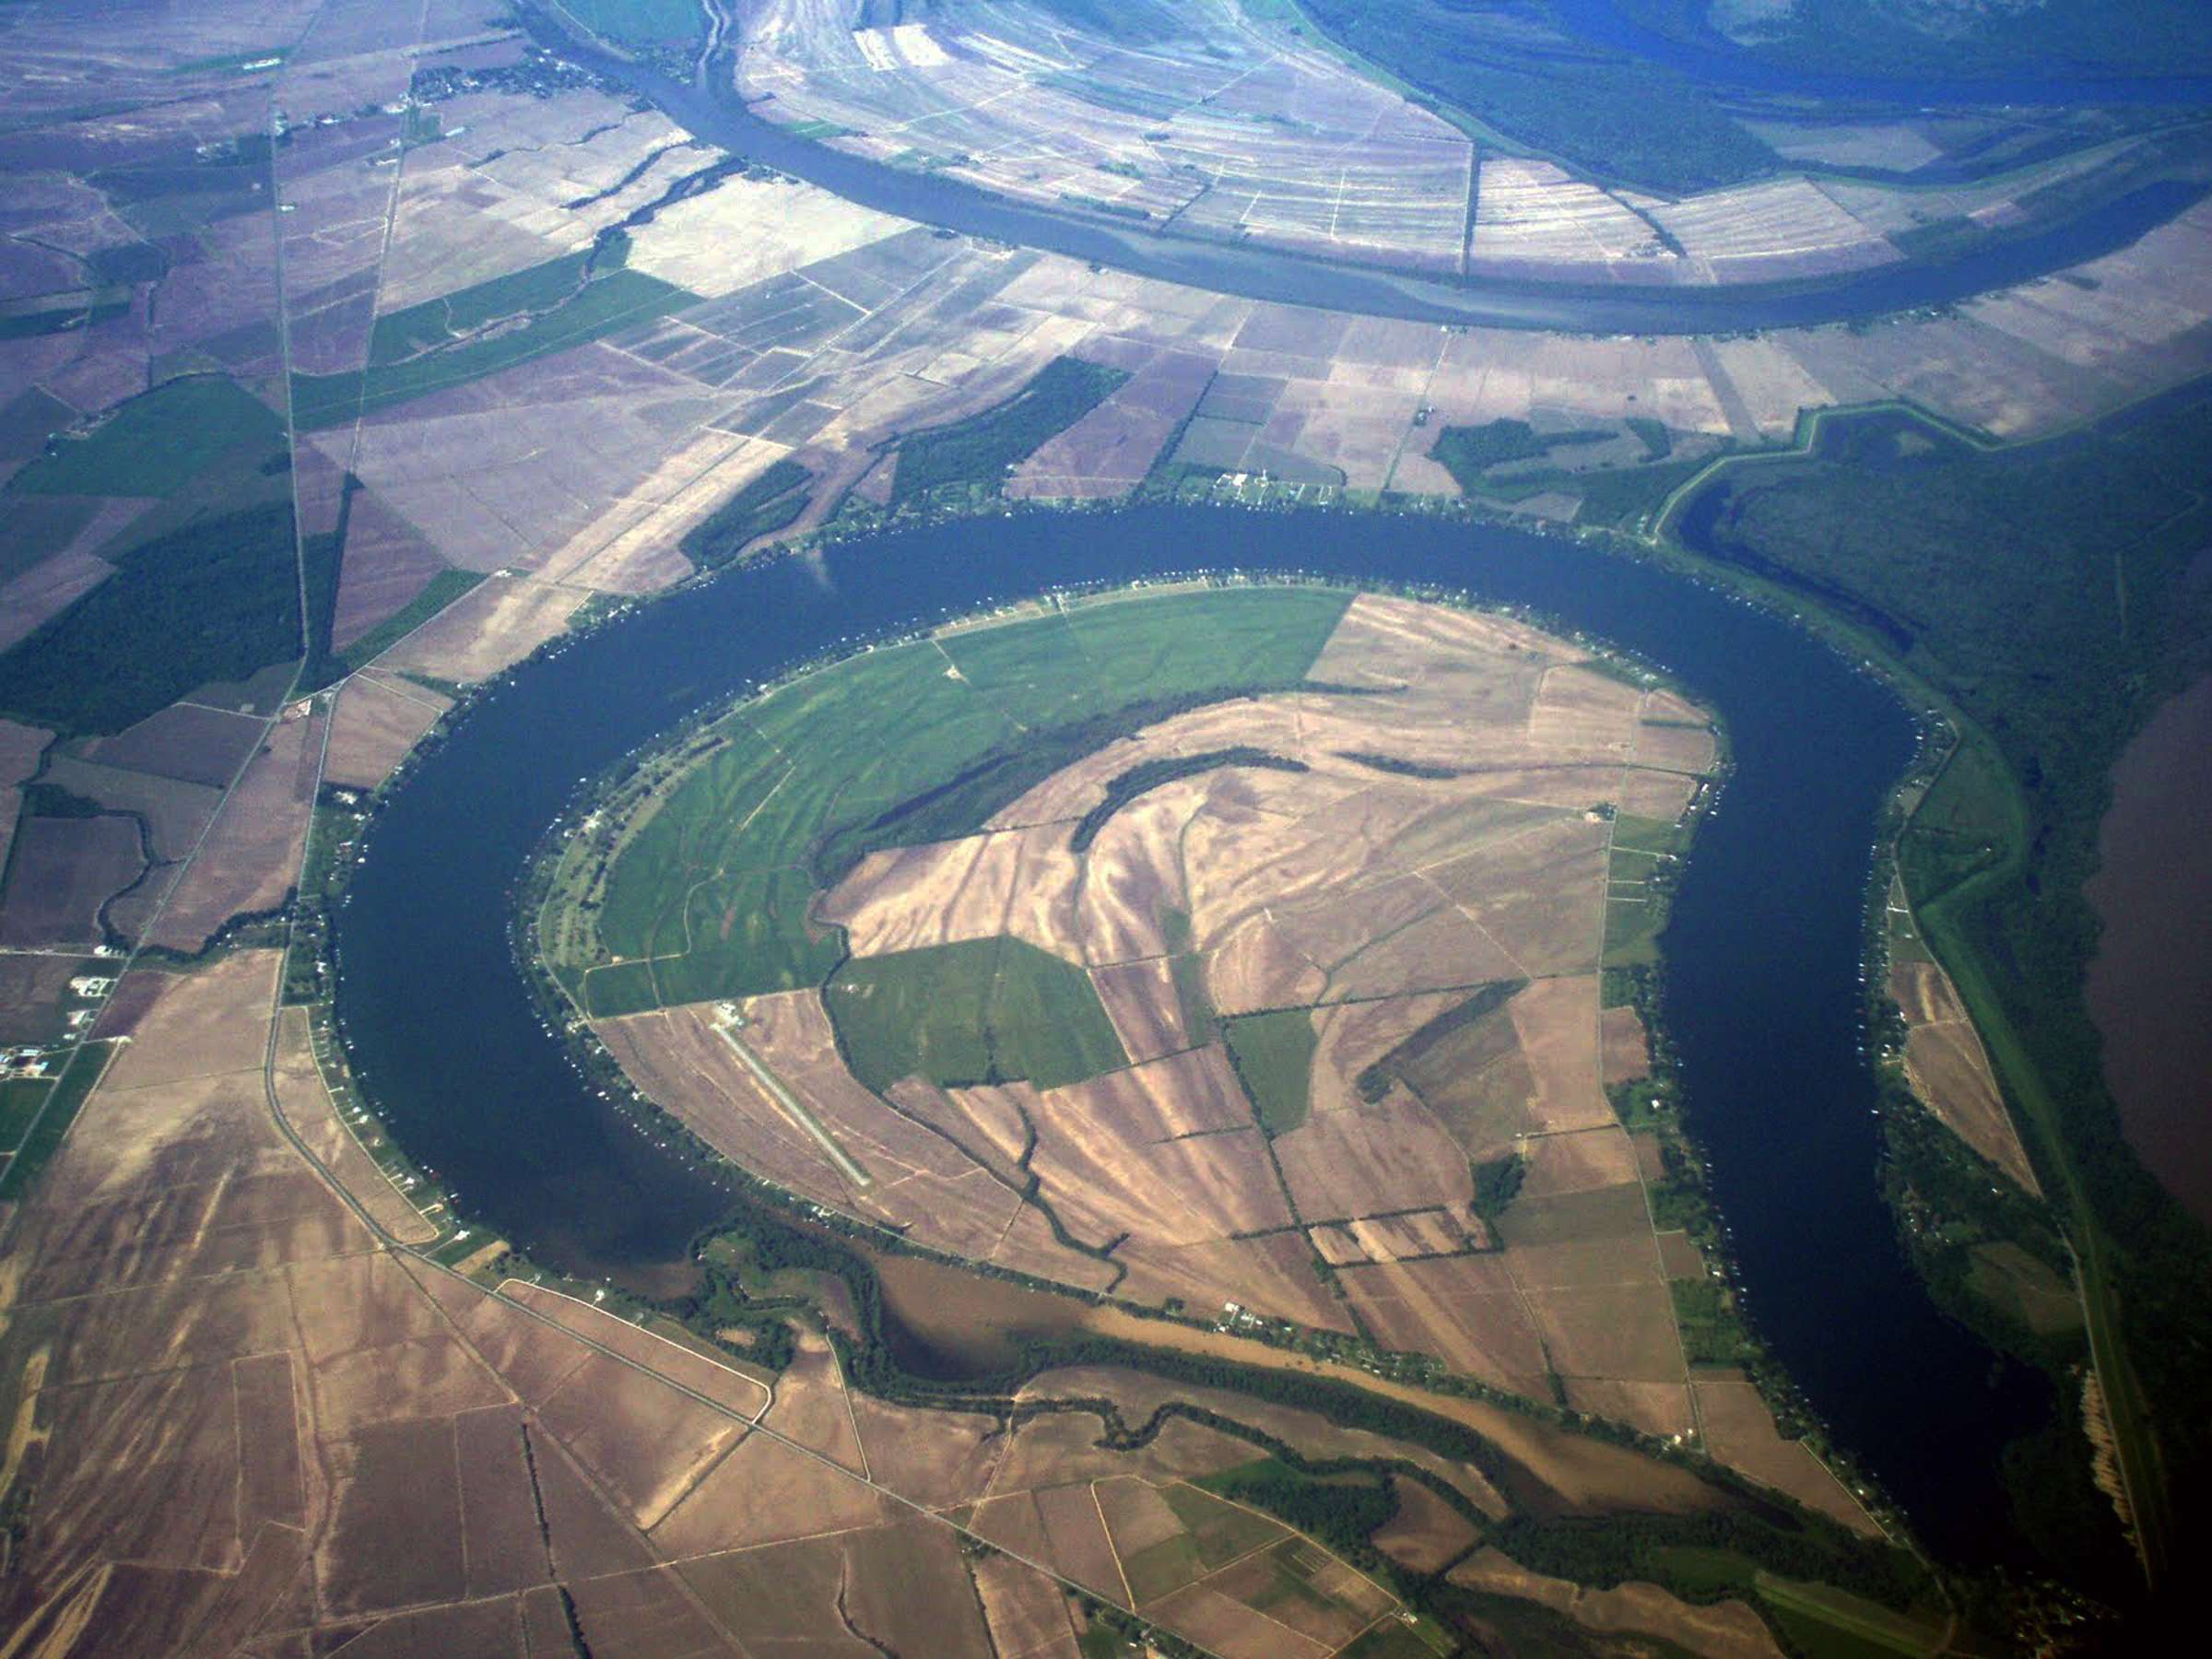 <b>The Mississippi River Oxbows</b><br>   

The Mississippi River Oxbows that Iâm talking about are in the northeastern part of the state on the western side of the river. There are four of them that deserve a mention â Bruin, Concordia, St. Johnâs and Providence. Theyâre all within a few minutes of each other except for Providence which is about an hour away from the other three.  
<p>
The bass that live in these oxbows will push 8 to 10 pounds during January through April but at other times a 5 or 6 pounder is considered a good fish. The average is probably closer to 3 pounds. The size of the bass isnât what these small lakes are all about, however. Itâs their beauty.